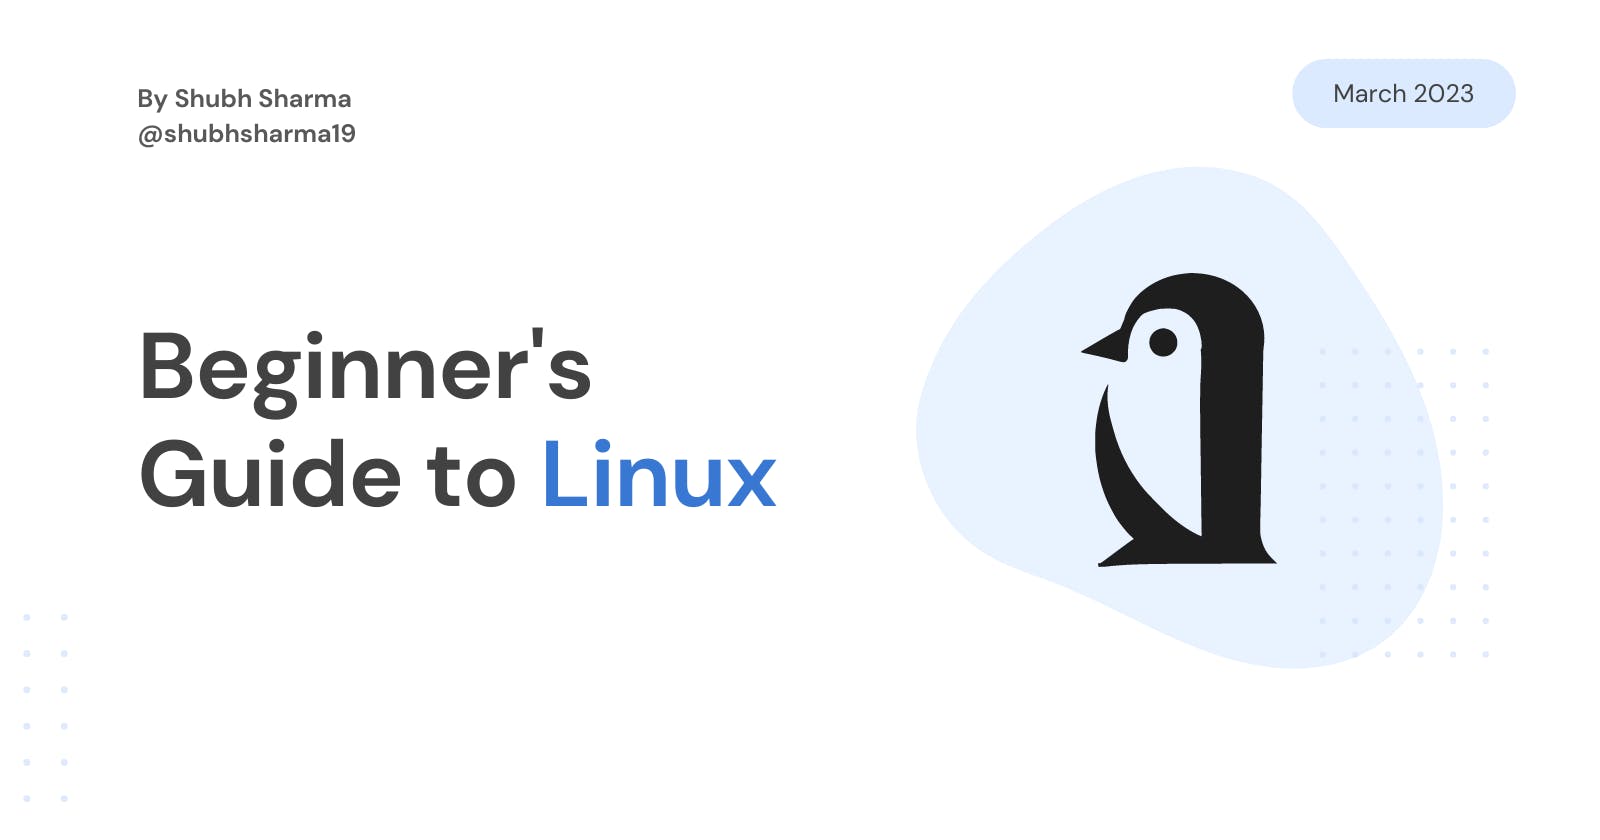 Beginner's Guide to Linux